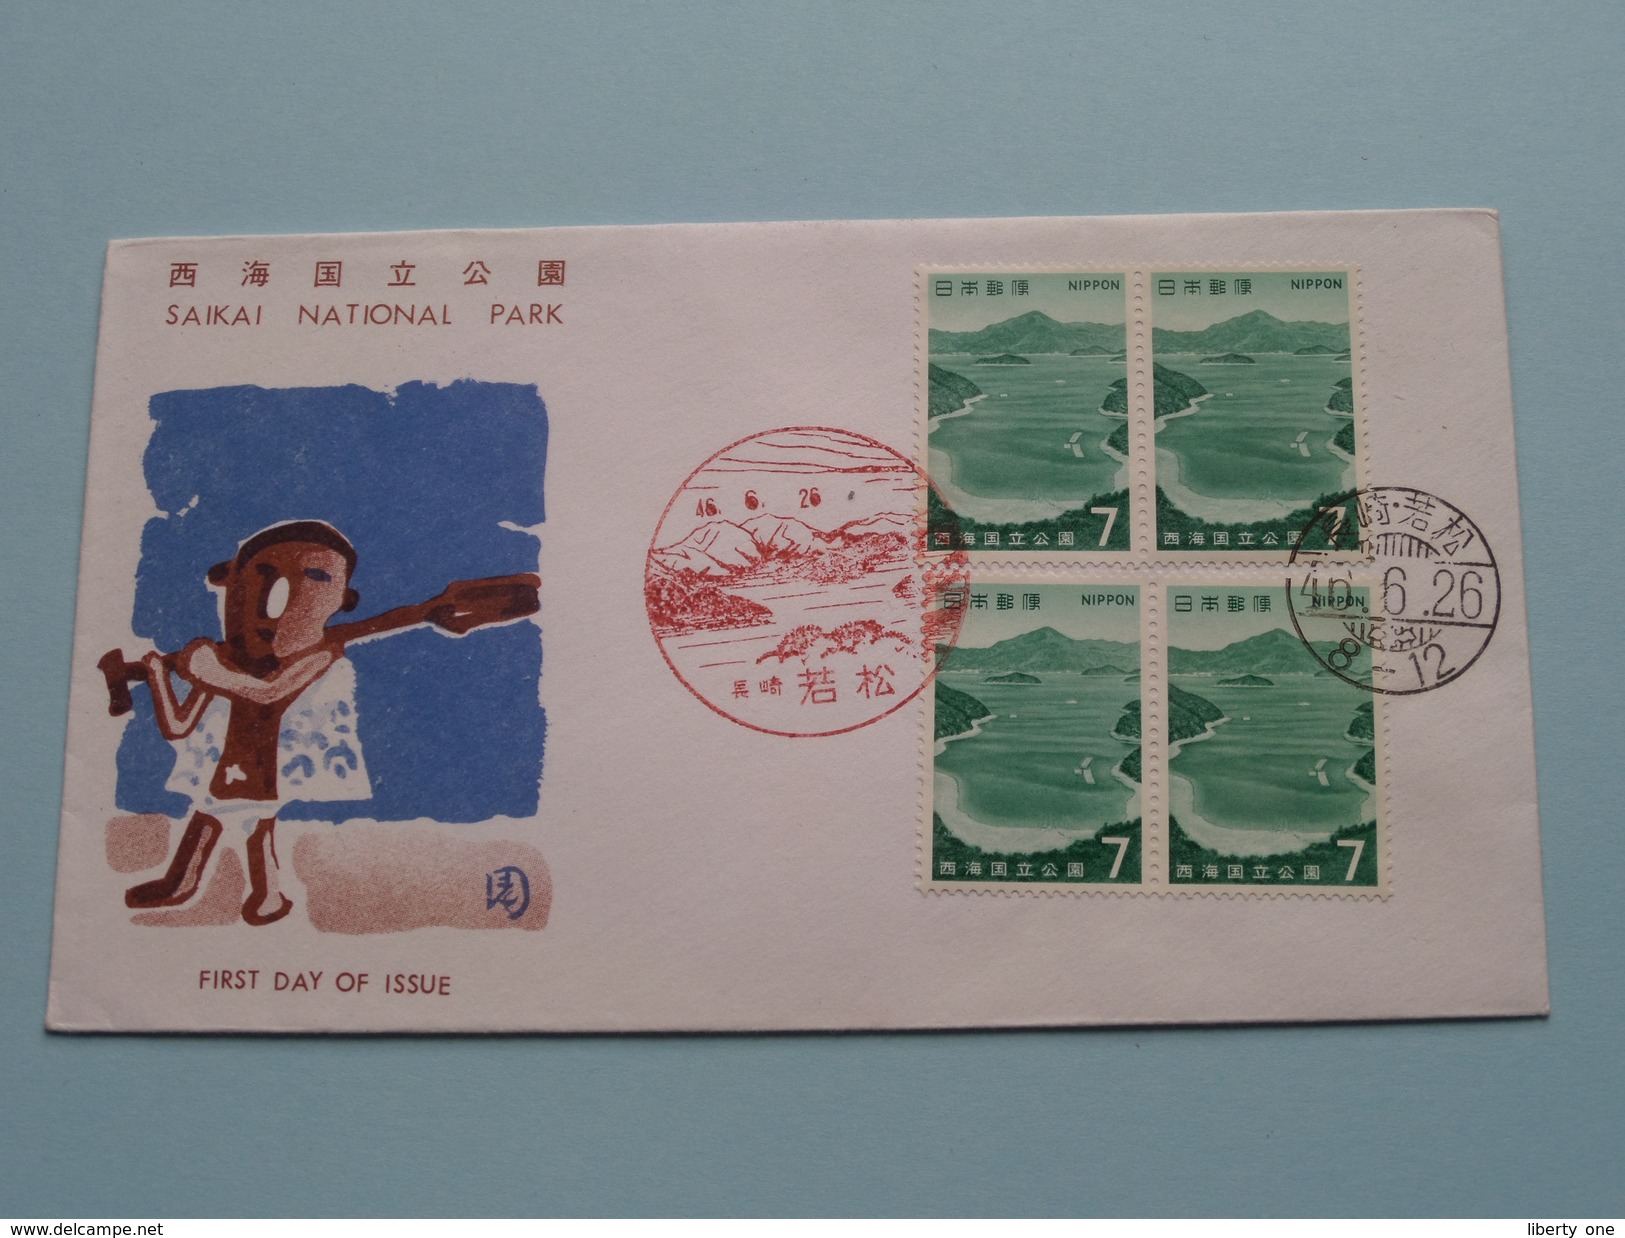 SAKAI NATIONAL PARK 46-6-26 ( The Society For Promotion Of Philately / See Photo ) ! - FDC